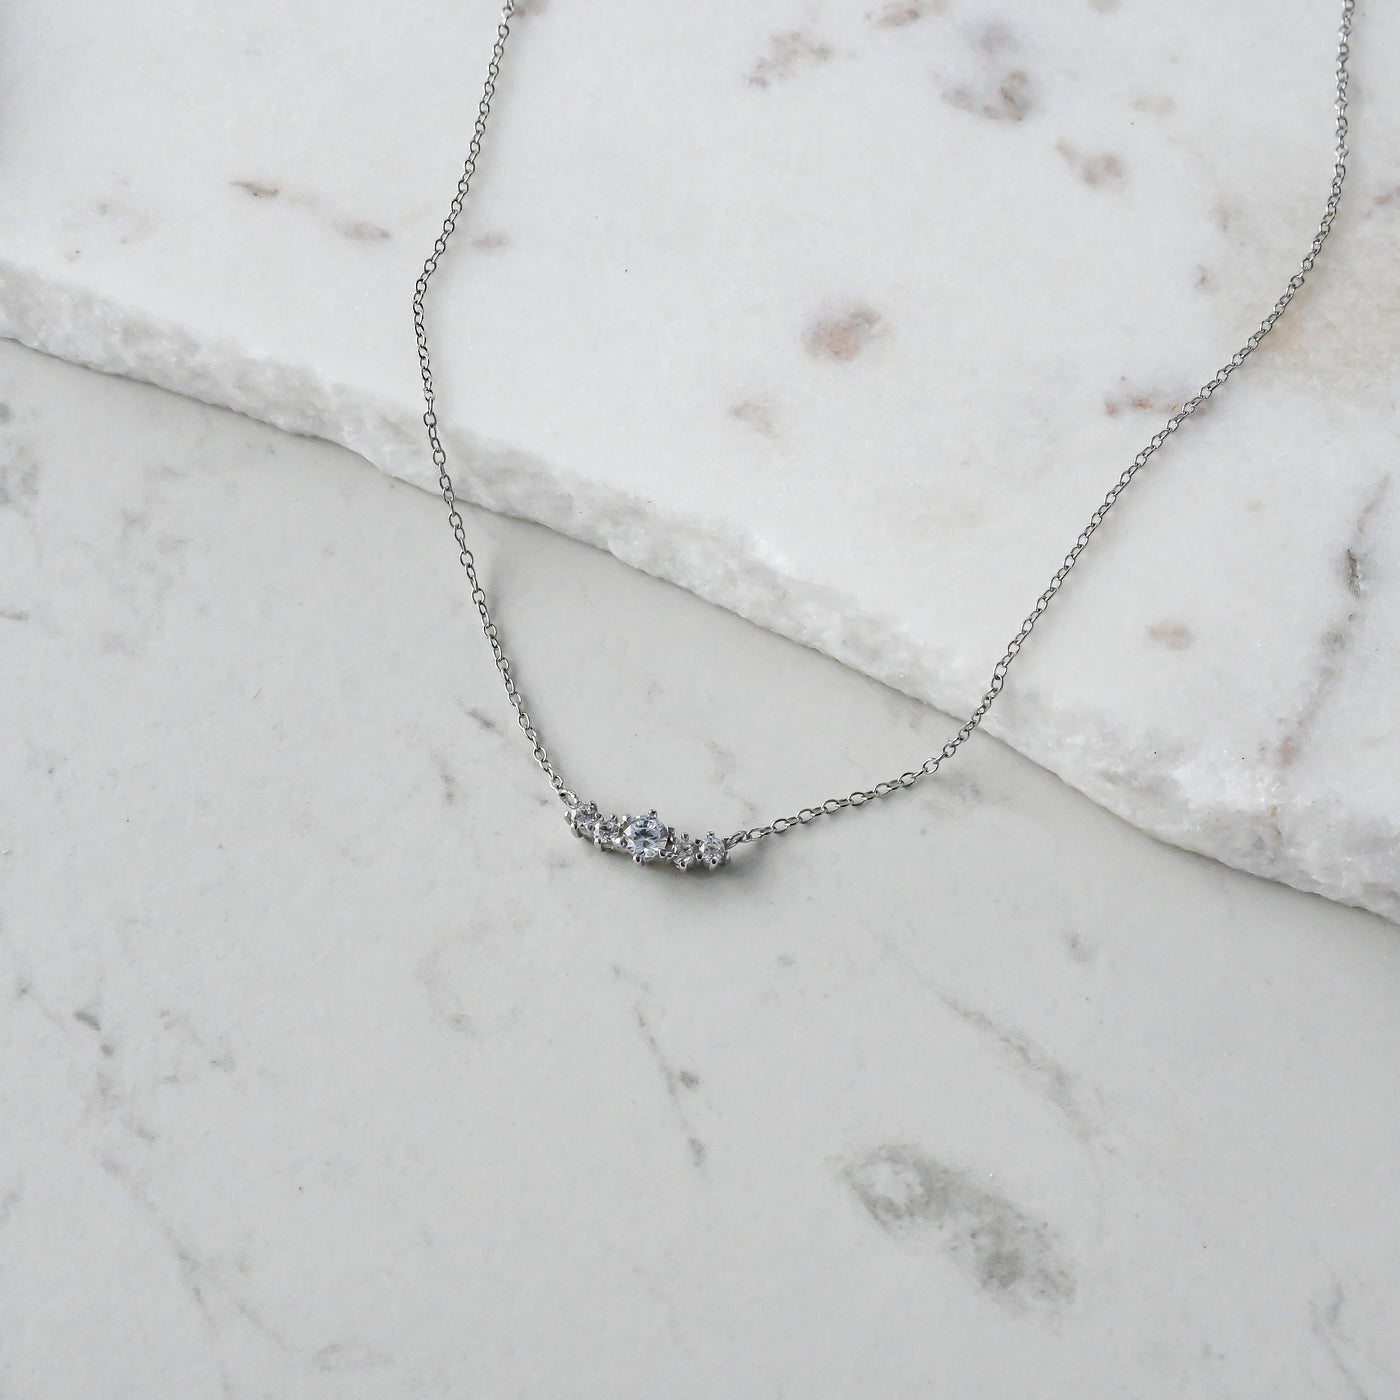 Five Crystal Silver Necklace